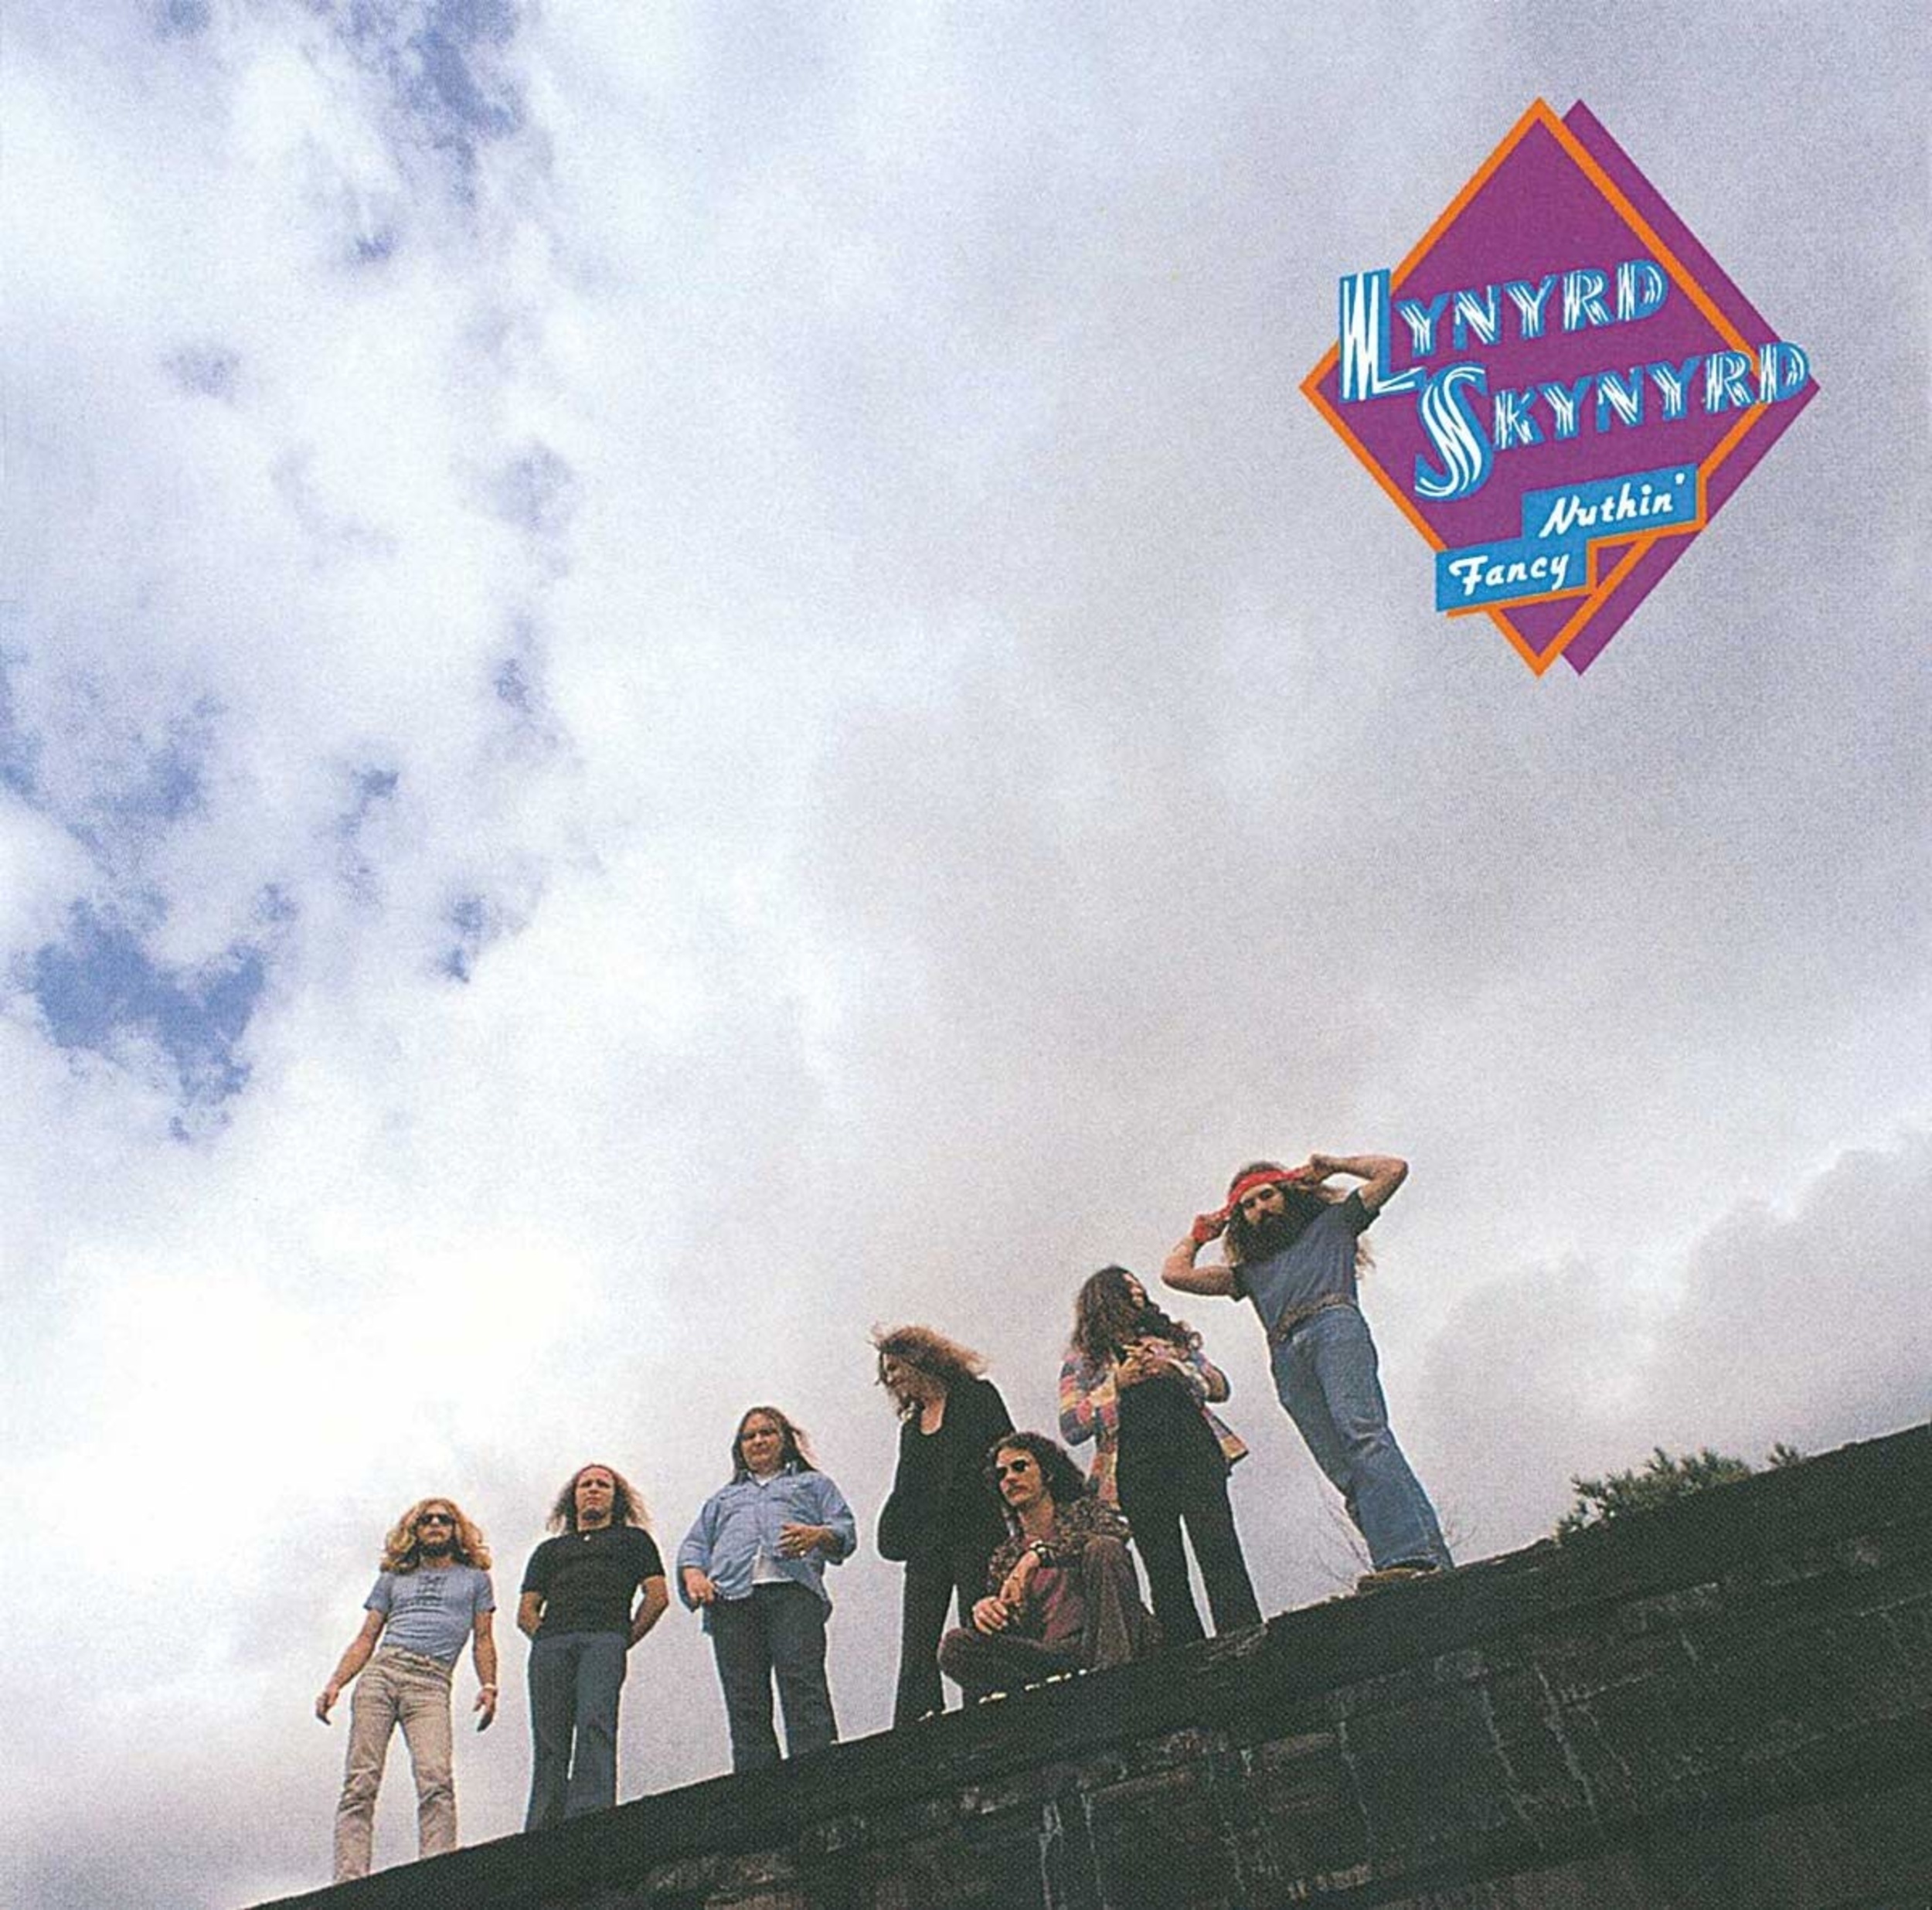 <p>From Skynyrd's third studio album <em>Nuthin</em><em>' </em><em>Fancy</em><span> (1975), this</span><a href="https://www.youtube.com/watch?v=BCr0FHHB20g"><span> closing number</span></a><span> is likely a deep cut to casual fans of the band. However, it's an underrated track to those hard-core Lynyrd Skynyrd supporters who tend to look past the hits. Speaking of underrated, pianist Billy Powell co-wrote this tune and subtly shines on it. There was plenty of talent on display within the realm of these Southern rockers, and Powell is certainly worth celebrating. </span></p>